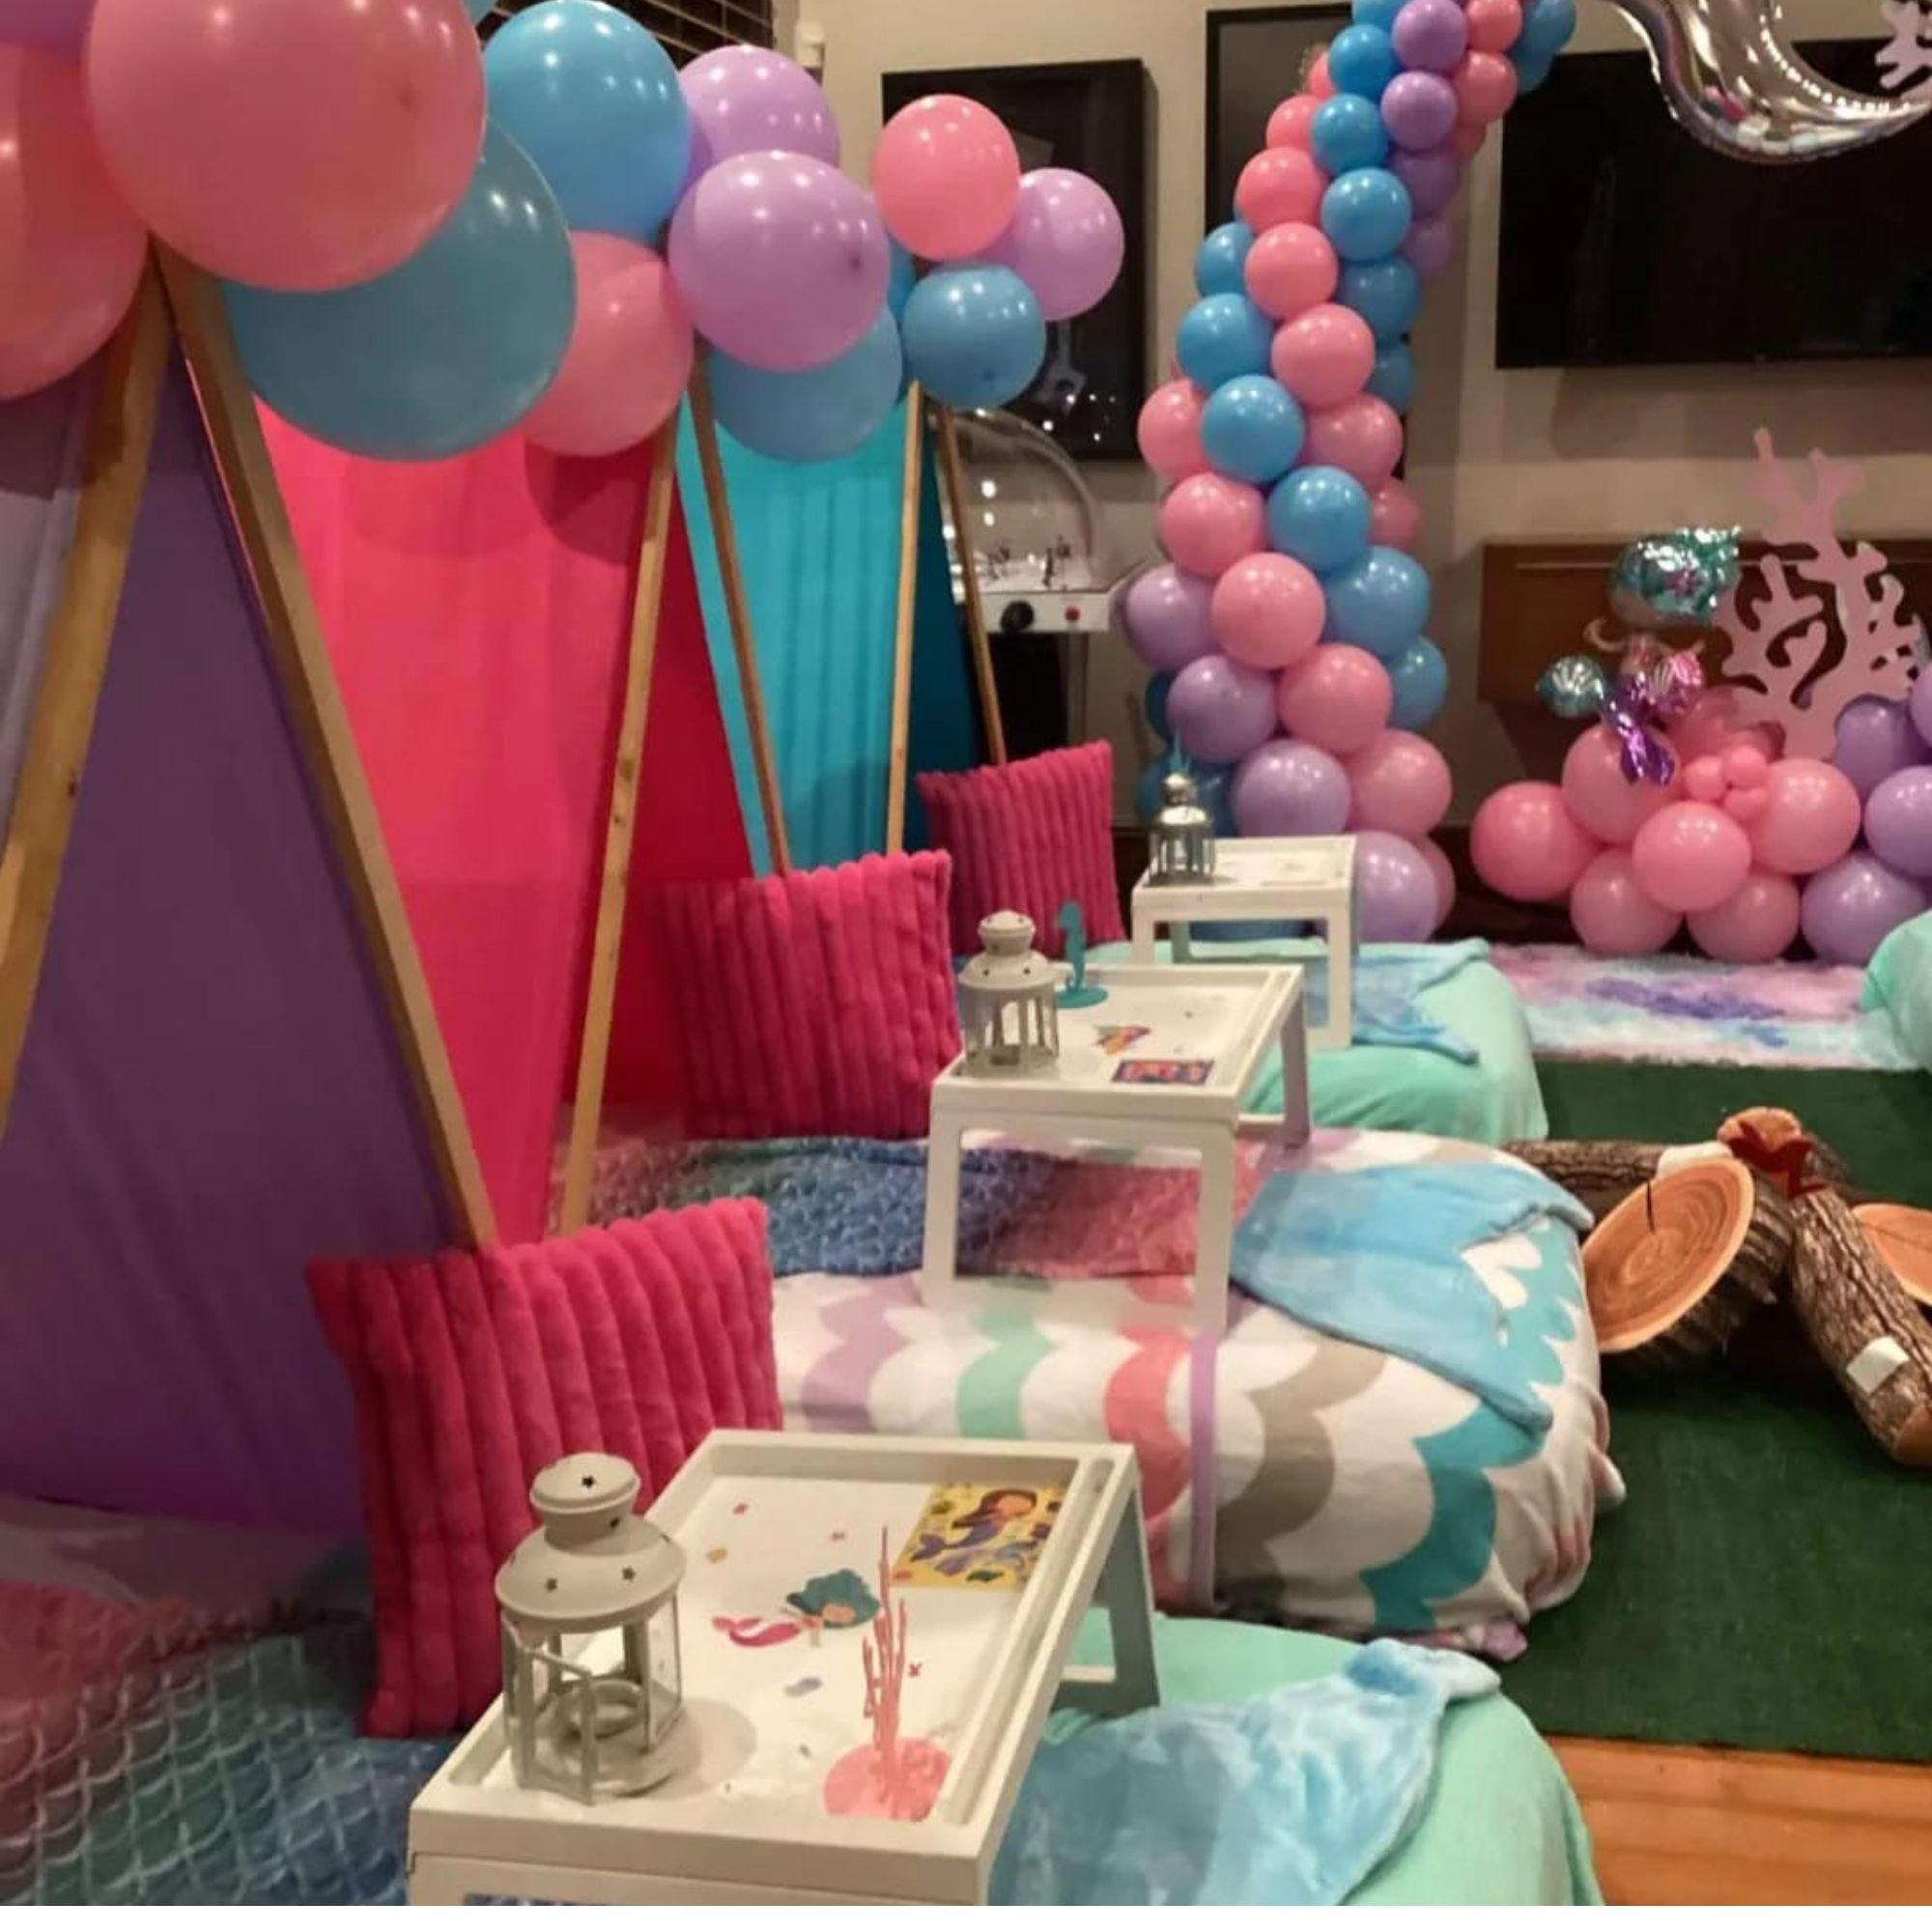 Kids Tent Slumber Party - Vegas Valley Balloons & Events | Party City